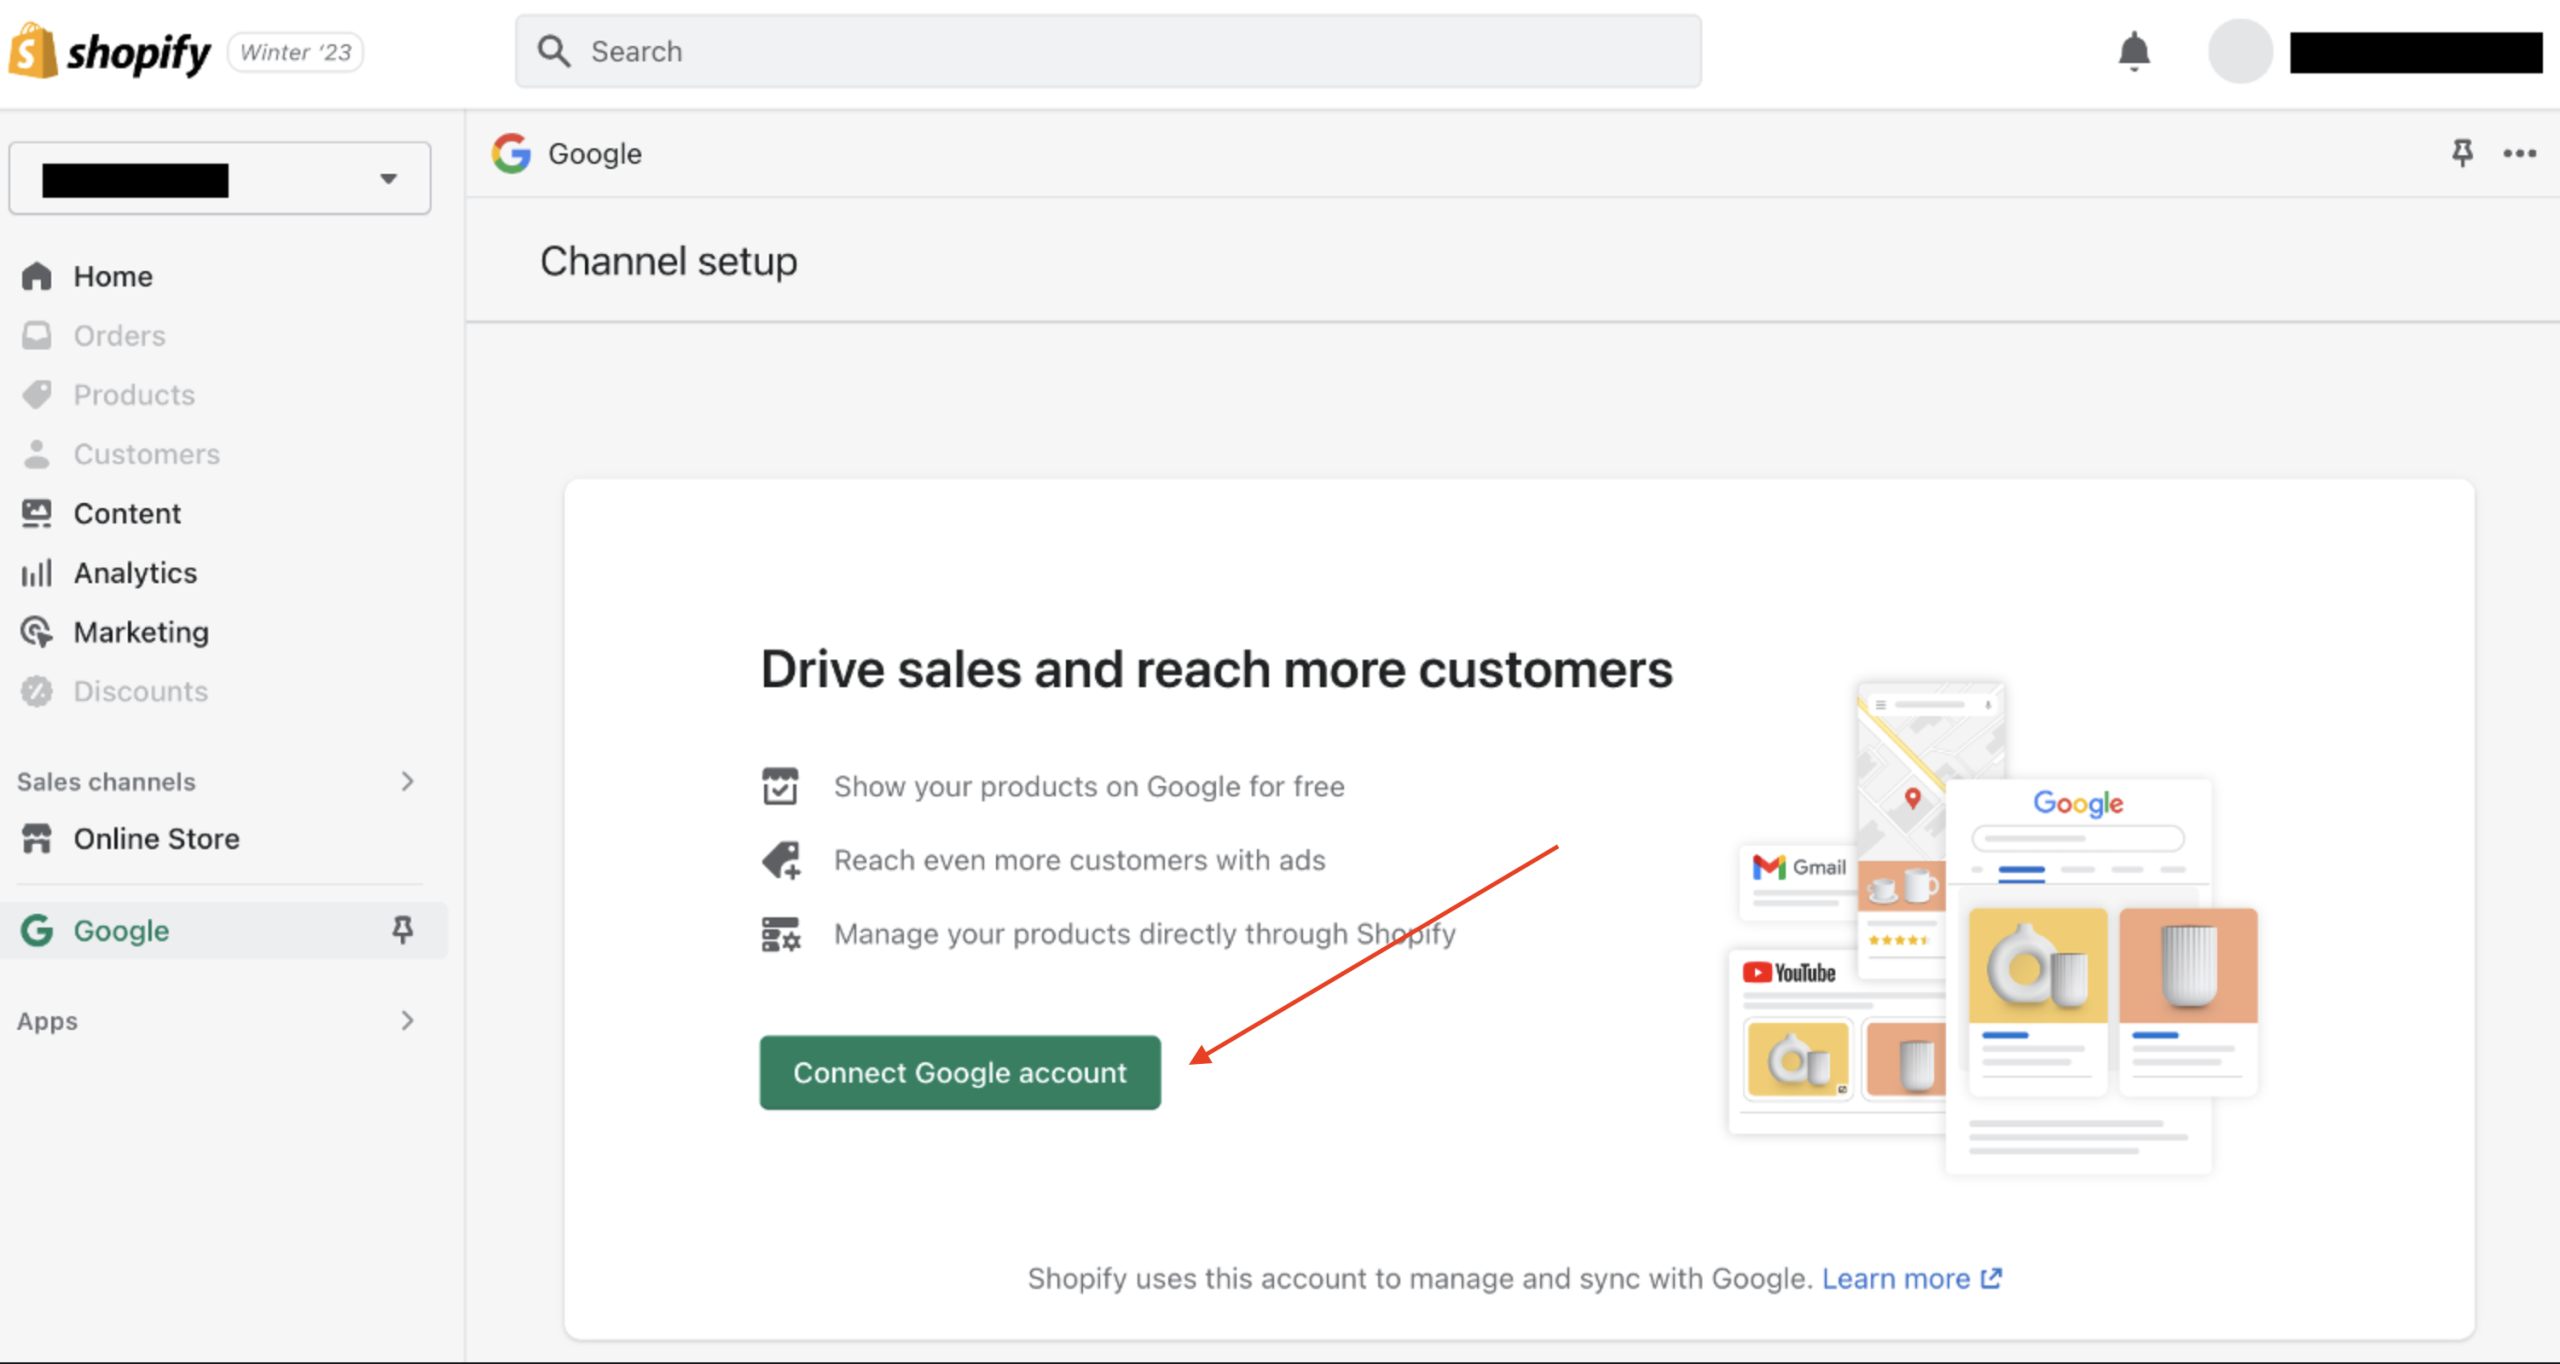 Screen shot of Google &amp;amp;amp;amp;amp;amp;amp;amp;amp;amp;amp;amp;amp;amp;amp;amp;amp;amp;amp;amp;amp;amp;amp;amp;amp;amp;amp;amp;amp;amp;amp;amp;amp;amp;amp;amp;amp;amp;amp;amp;amp;amp;amp;amp;amp;amp;amp;amp;amp;amp;amp;amp;amp;amp;amp;amp;amp;amp;amp;amp;amp;amp;amp;amp;amp;amp;amp;amp;amp;amp;amp;amp;amp;amp;amp;amp;amp;amp;amp;amp;amp;amp;amp;amp;amp;amp;amp;amp;amp;amp;amp;amp;amp;amp;amp;amp;amp;amp;amp;amp;amp;amp;amp;amp;amp;amp;amp;amp;amp;amp;amp;amp;amp;amp;amp;amp;amp;amp;amp;amp;amp;amp;amp;amp;amp;amp;amp;amp;amp;amp;amp;amp;amp;amp;amp;amp;amp;amp;amp;amp;amp;amp;amp;amp;amp;amp;amp;amp;amp;amp;amp;amp;amp;amp;amp;amp;amp;amp;amp;amp;amp;amp;amp;amp;amp;amp;amp;amp;amp;amp;amp;amp;amp;amp;amp;amp;amp;amp;amp; YouTube app in Shopify interface, with annotation of how to connect with Google Merchant center